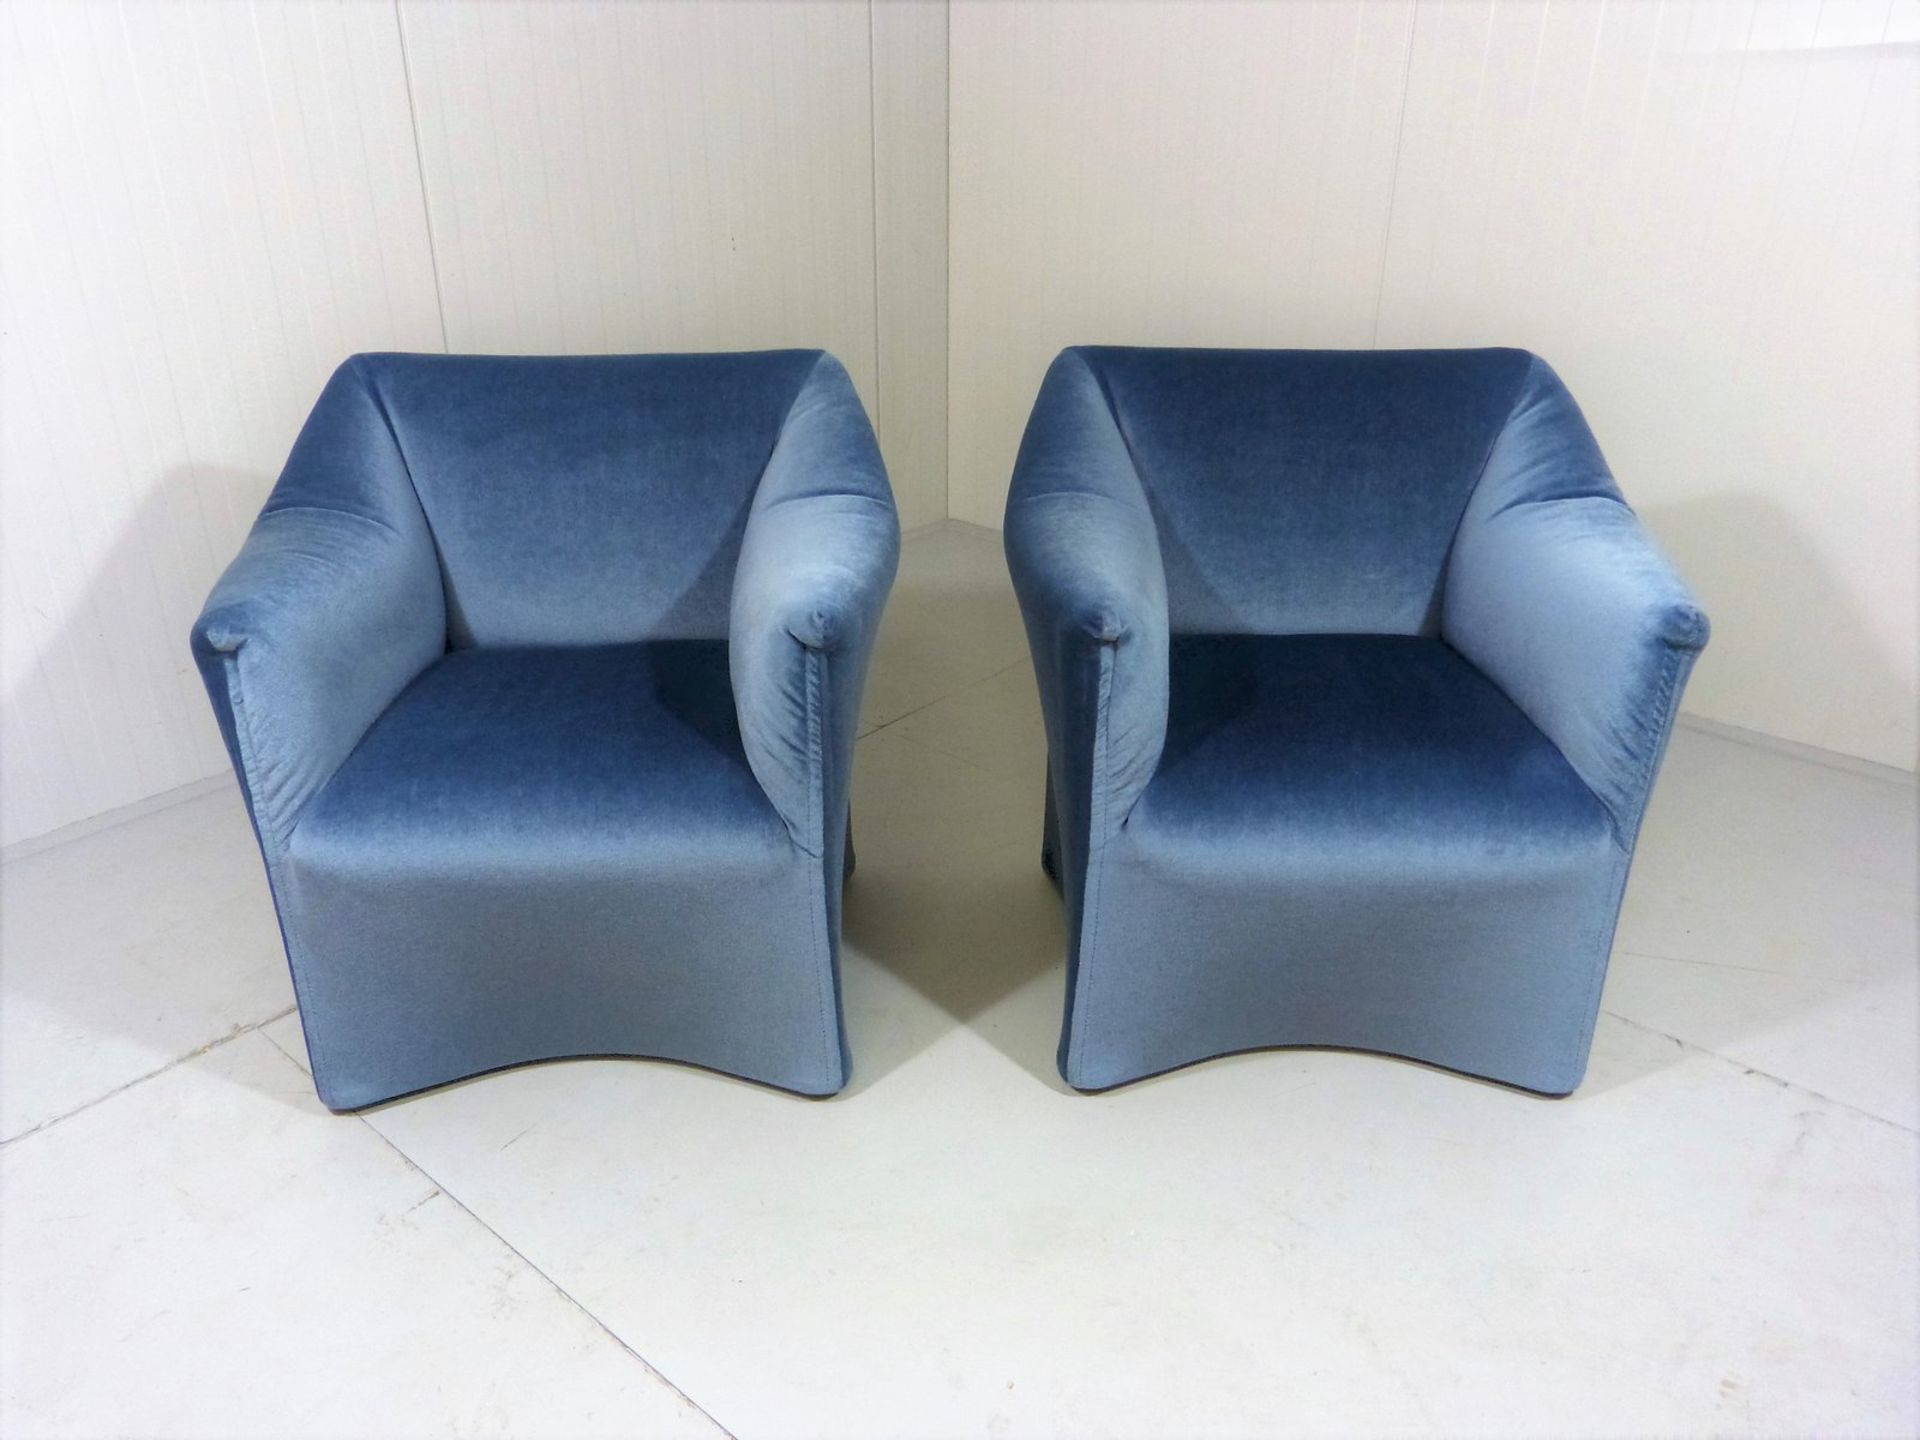 Italian Great Temptation Lounge Chairs by Mario Bellini for Cassina, 1970s, Set of 2 recently